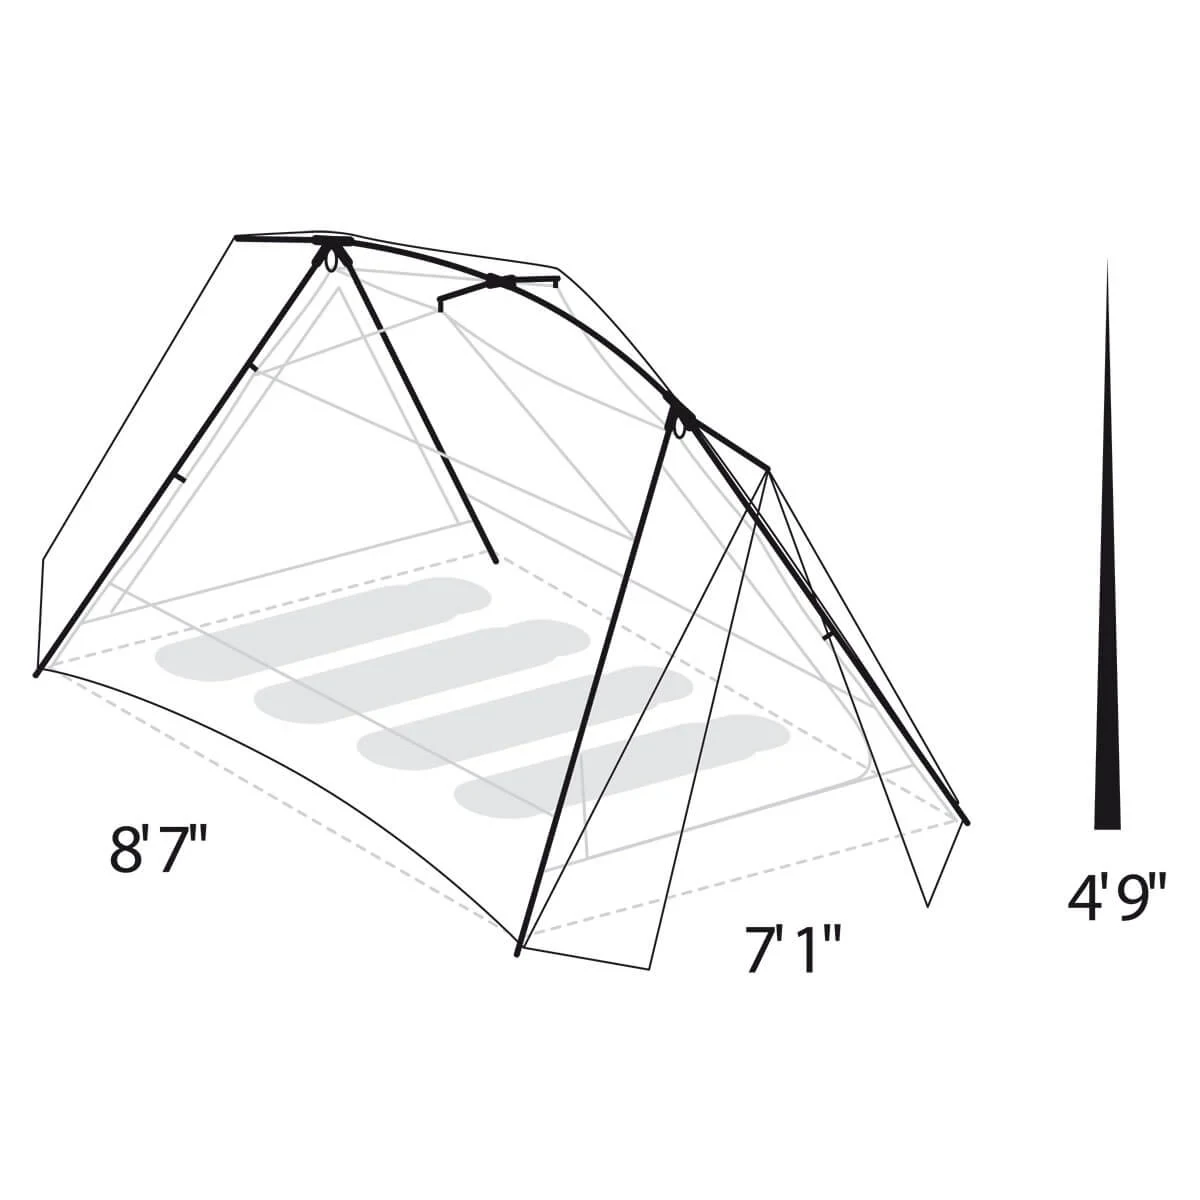 Timberline SQ Outfitter 4 person tent spec diagram